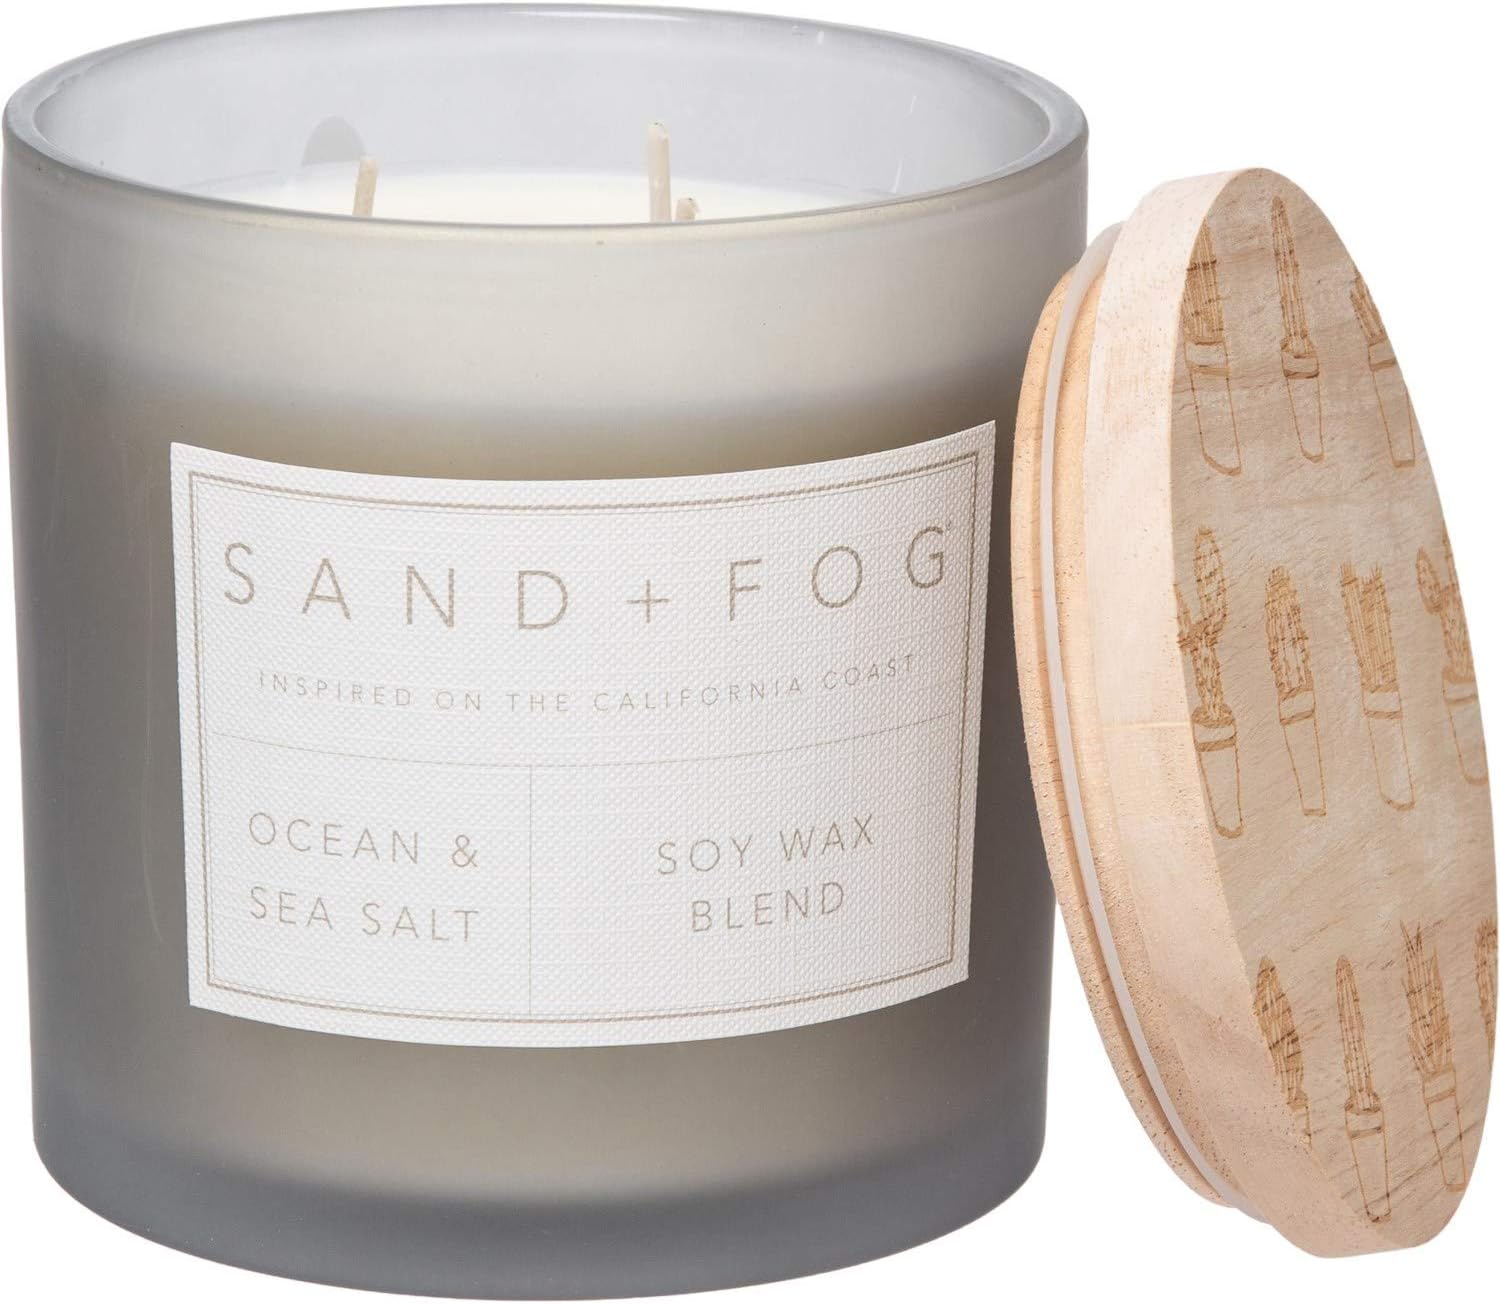 What Are Sand And Fog Candles Made Of